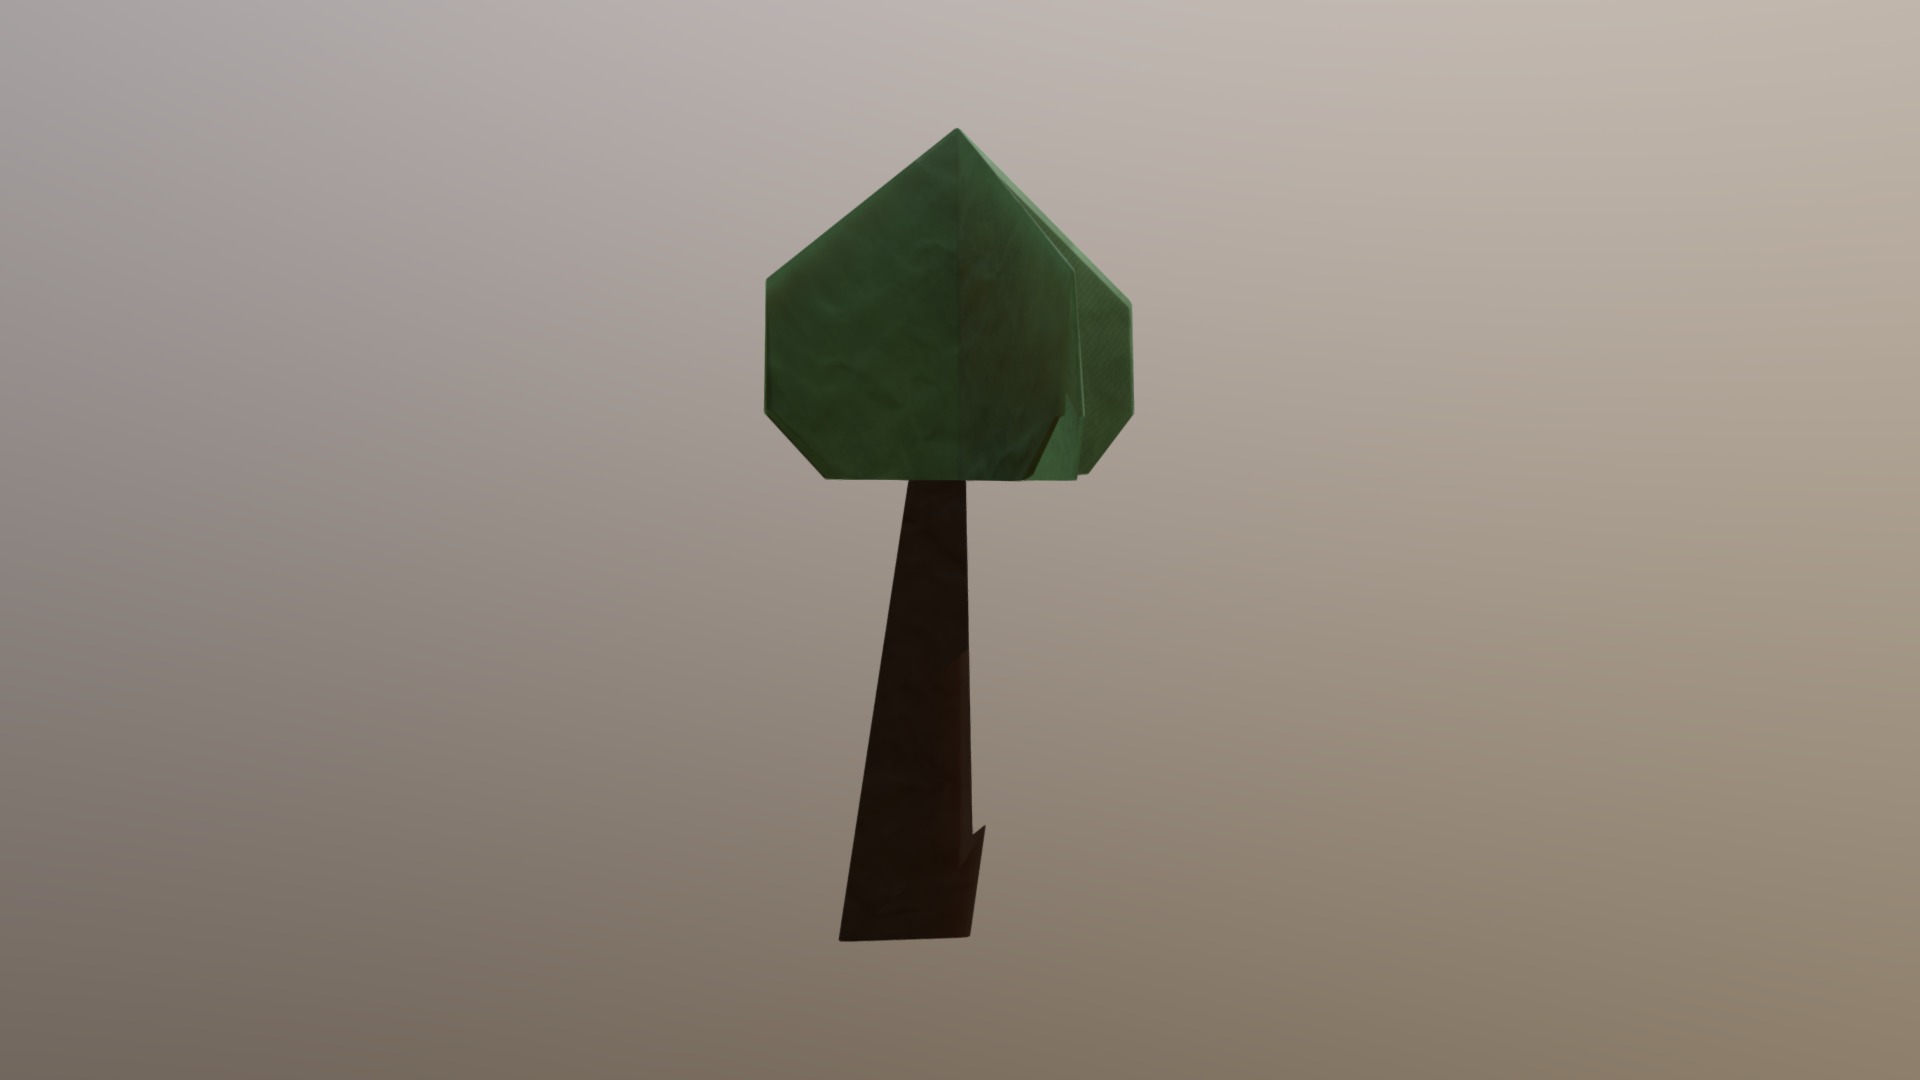 3D model Origami Tree - This is a 3D model of the Origami Tree. The 3D model is about a green and black sign.